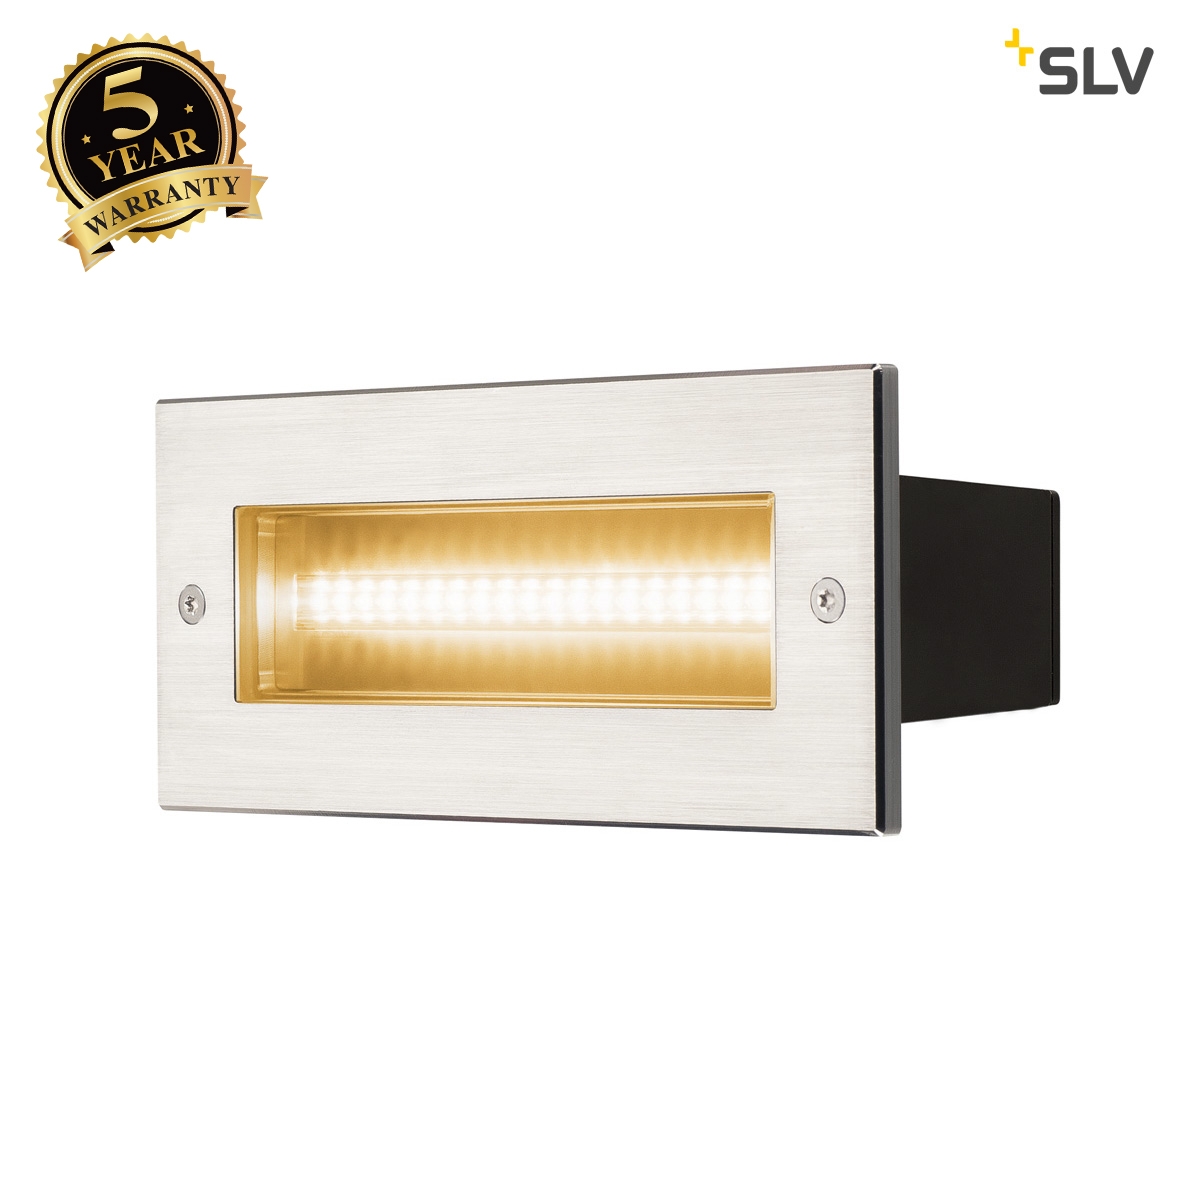 SLV BRICK, outdoor recessed wall light, LED, 3000K, stainless steel, IP67, 240V, 950lm 10W 233650